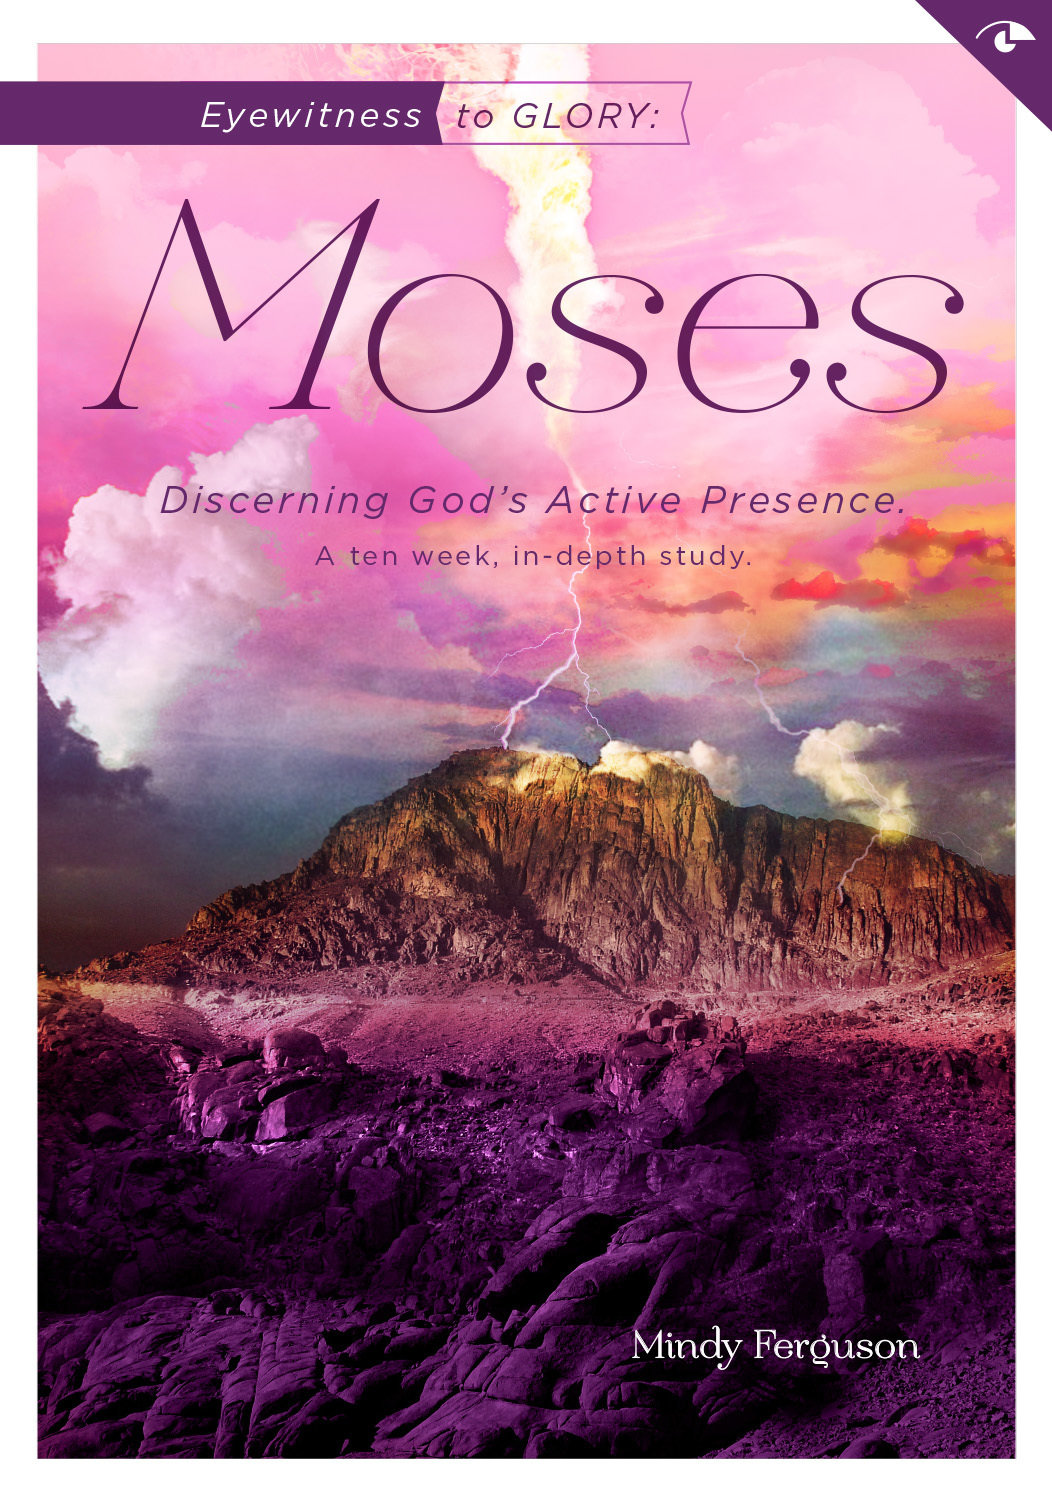 Moses: Eyewitness to Glory Video Series on Flash Drive